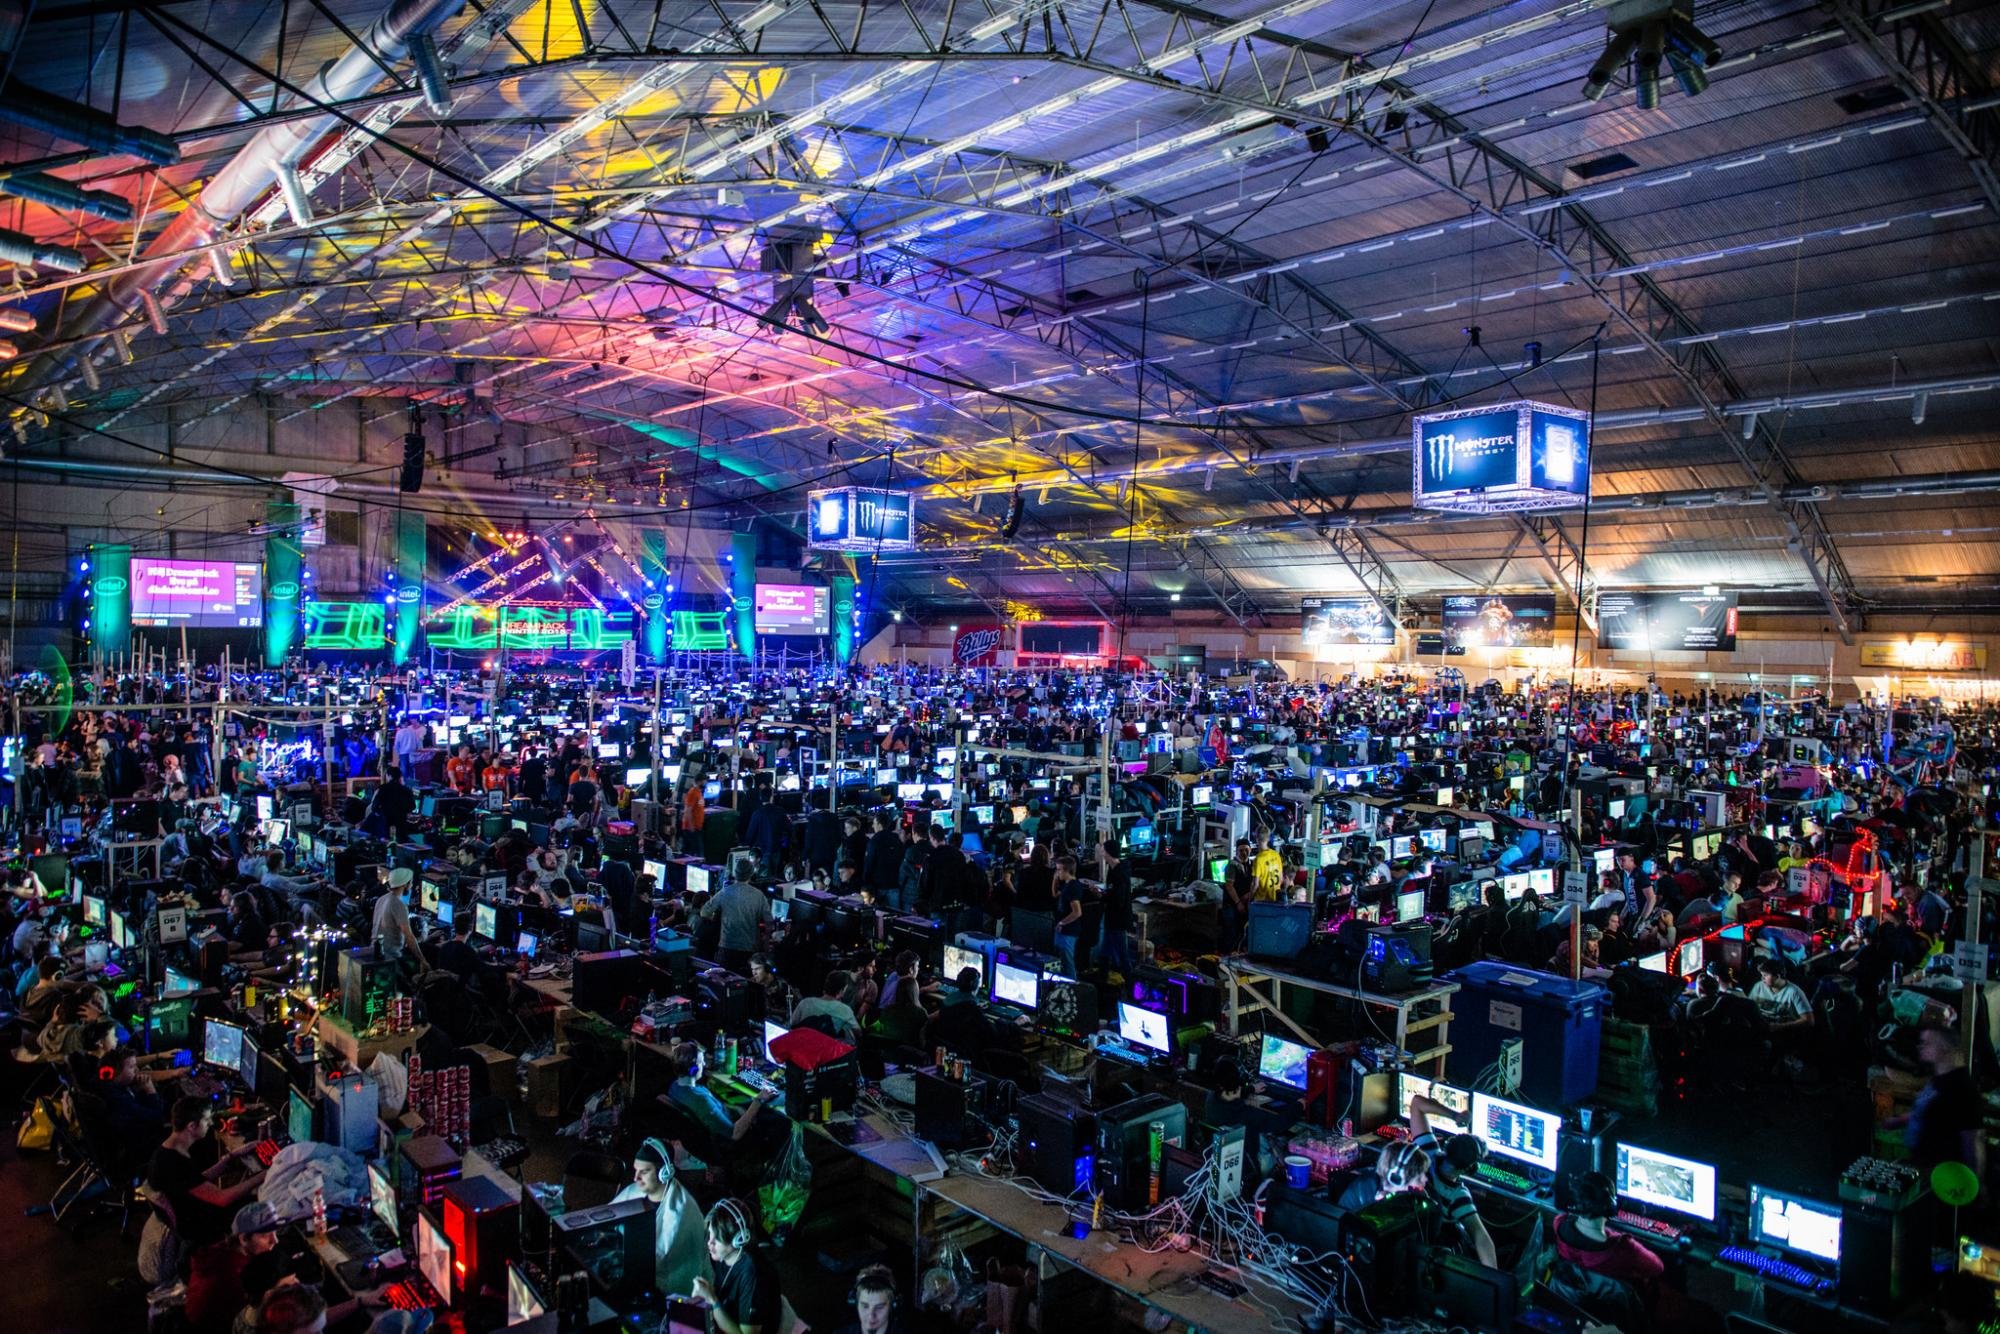 DreamHack Mumbai 2018 A Big Feast For All Kinds Of Gamers